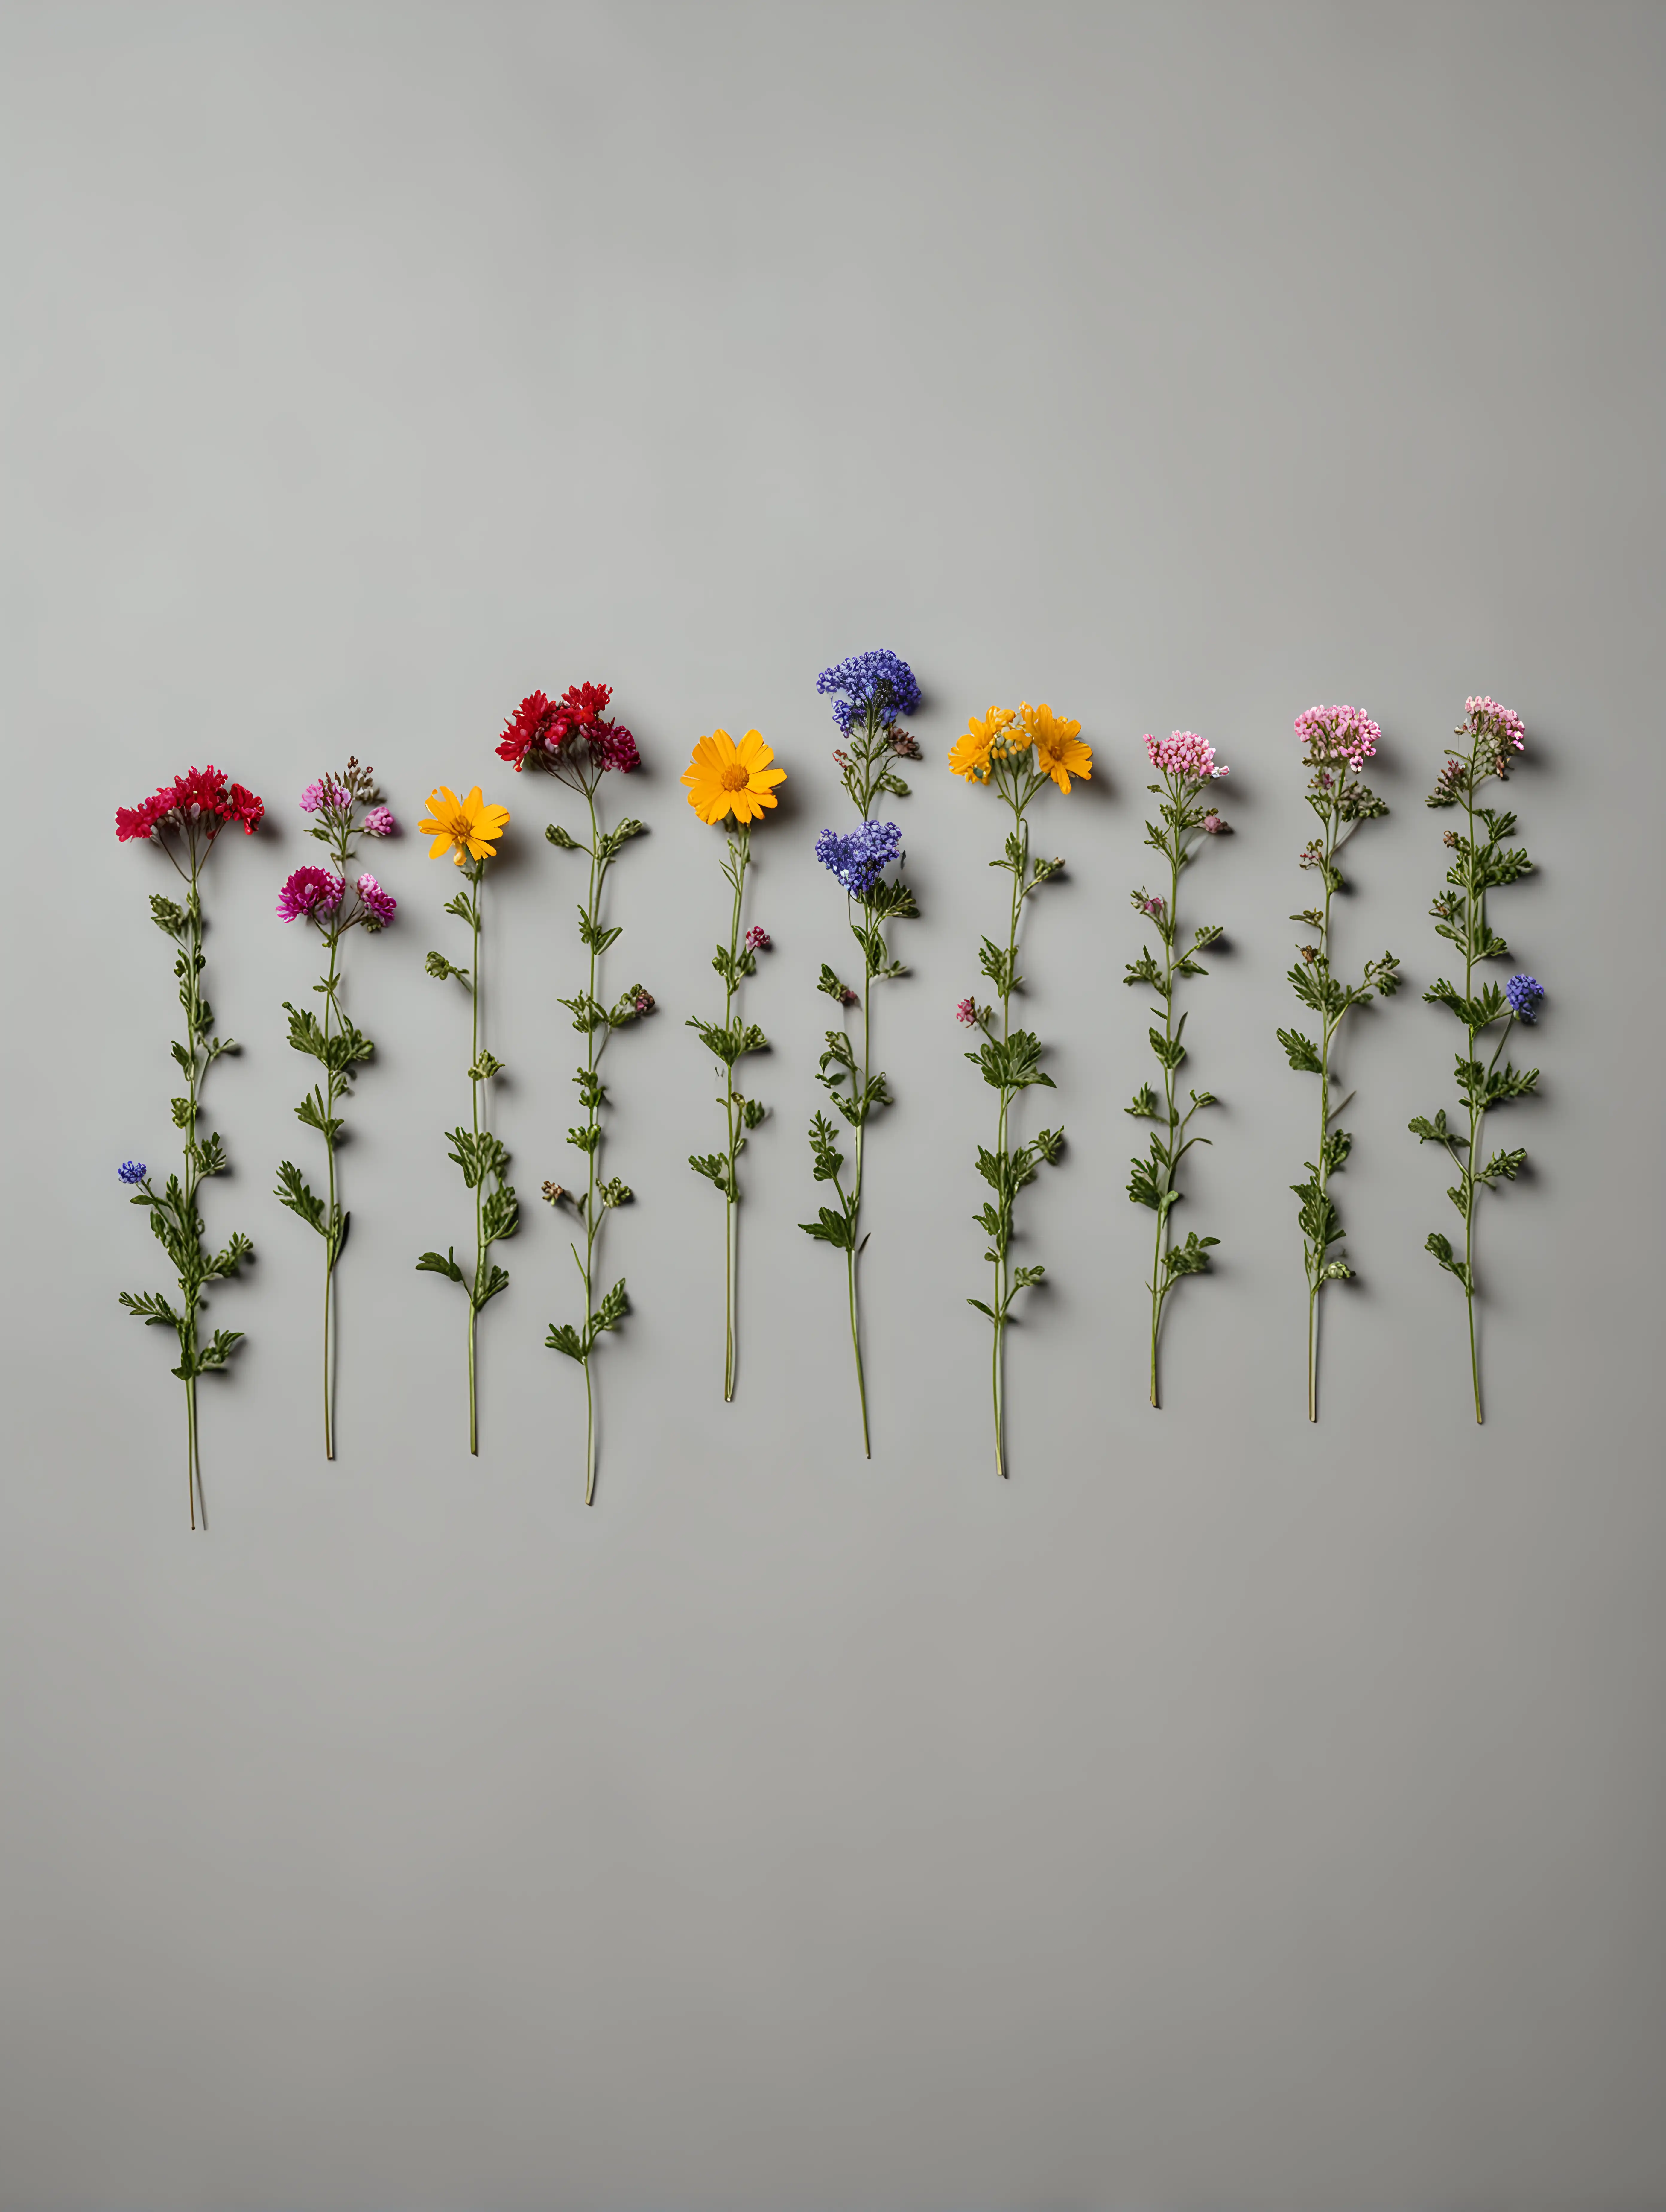 a single row of wildflowers across the bottom of the neutral gray background.